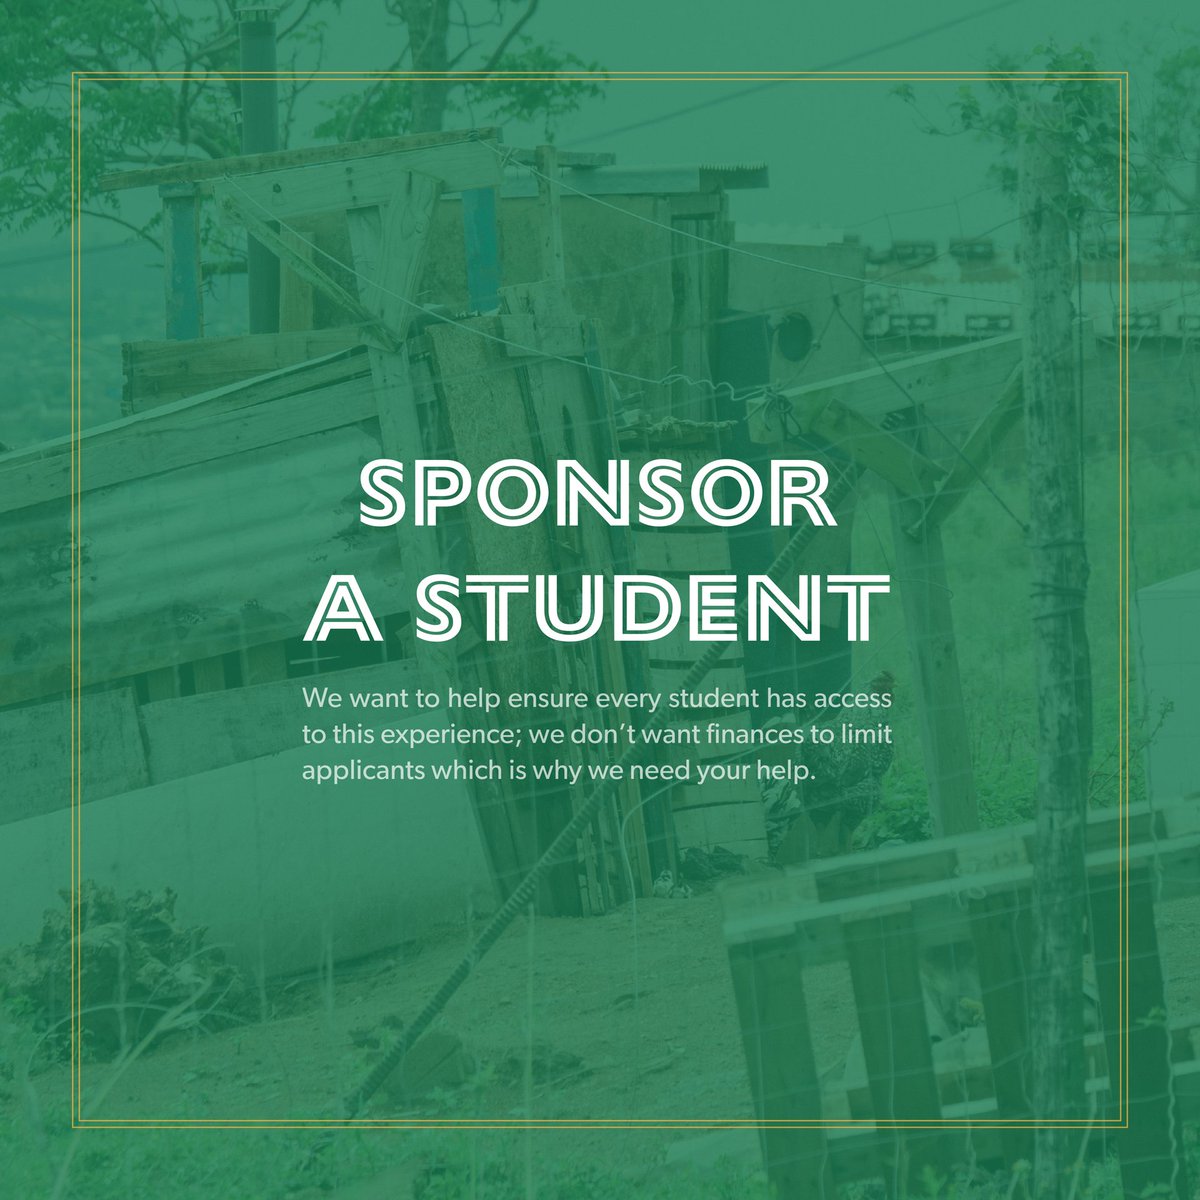 It is our hope that finances never keep someone from participating.
=
Become a #sponsor at the link in bio.
=
#UbuntuASA #SponsoraStudent #StudentSupport #Equity